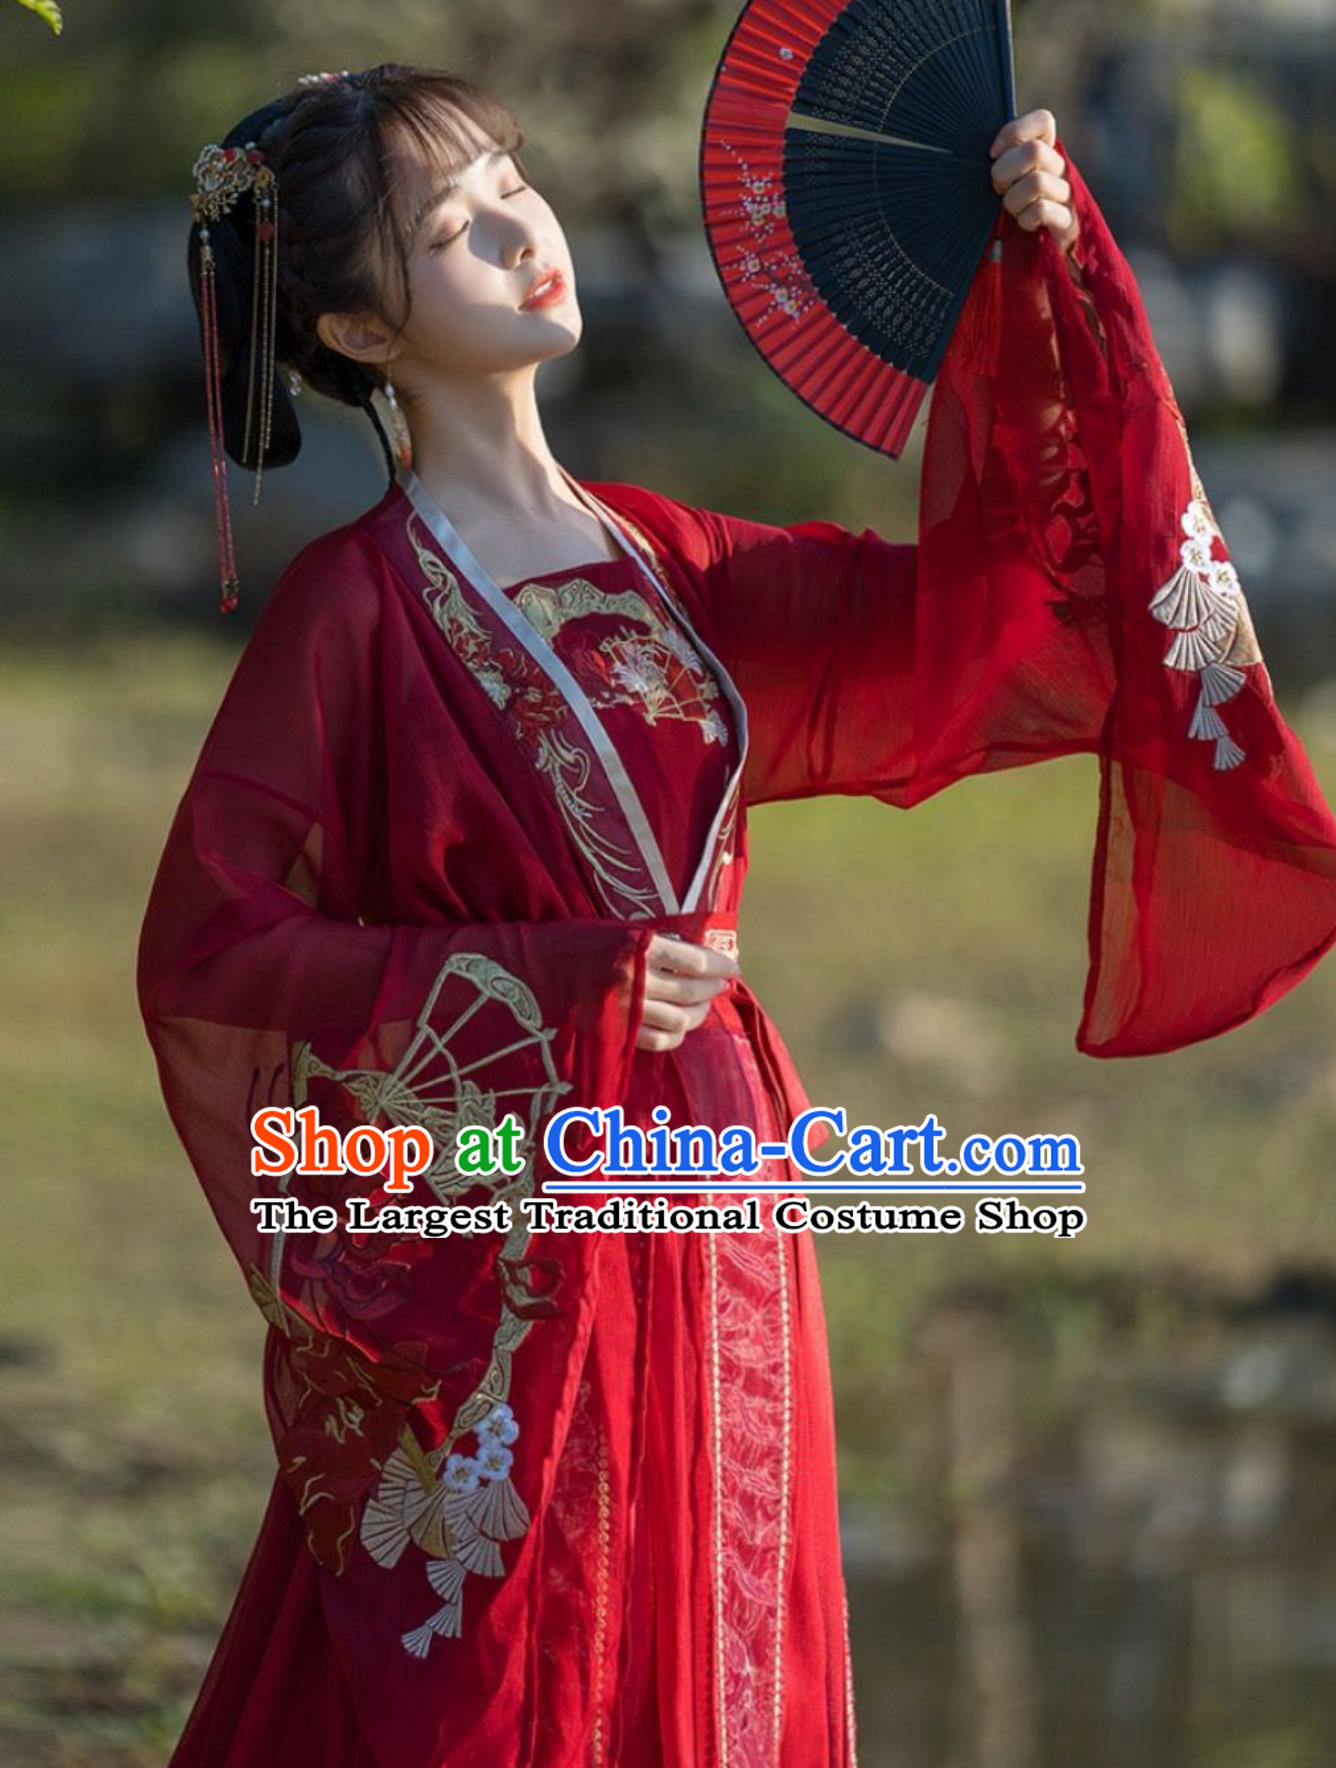 Chinese Traditional Bride Wedding Dress Hanfu Online Buy Ancient Chinese Tang Dynasty Princess Costumes